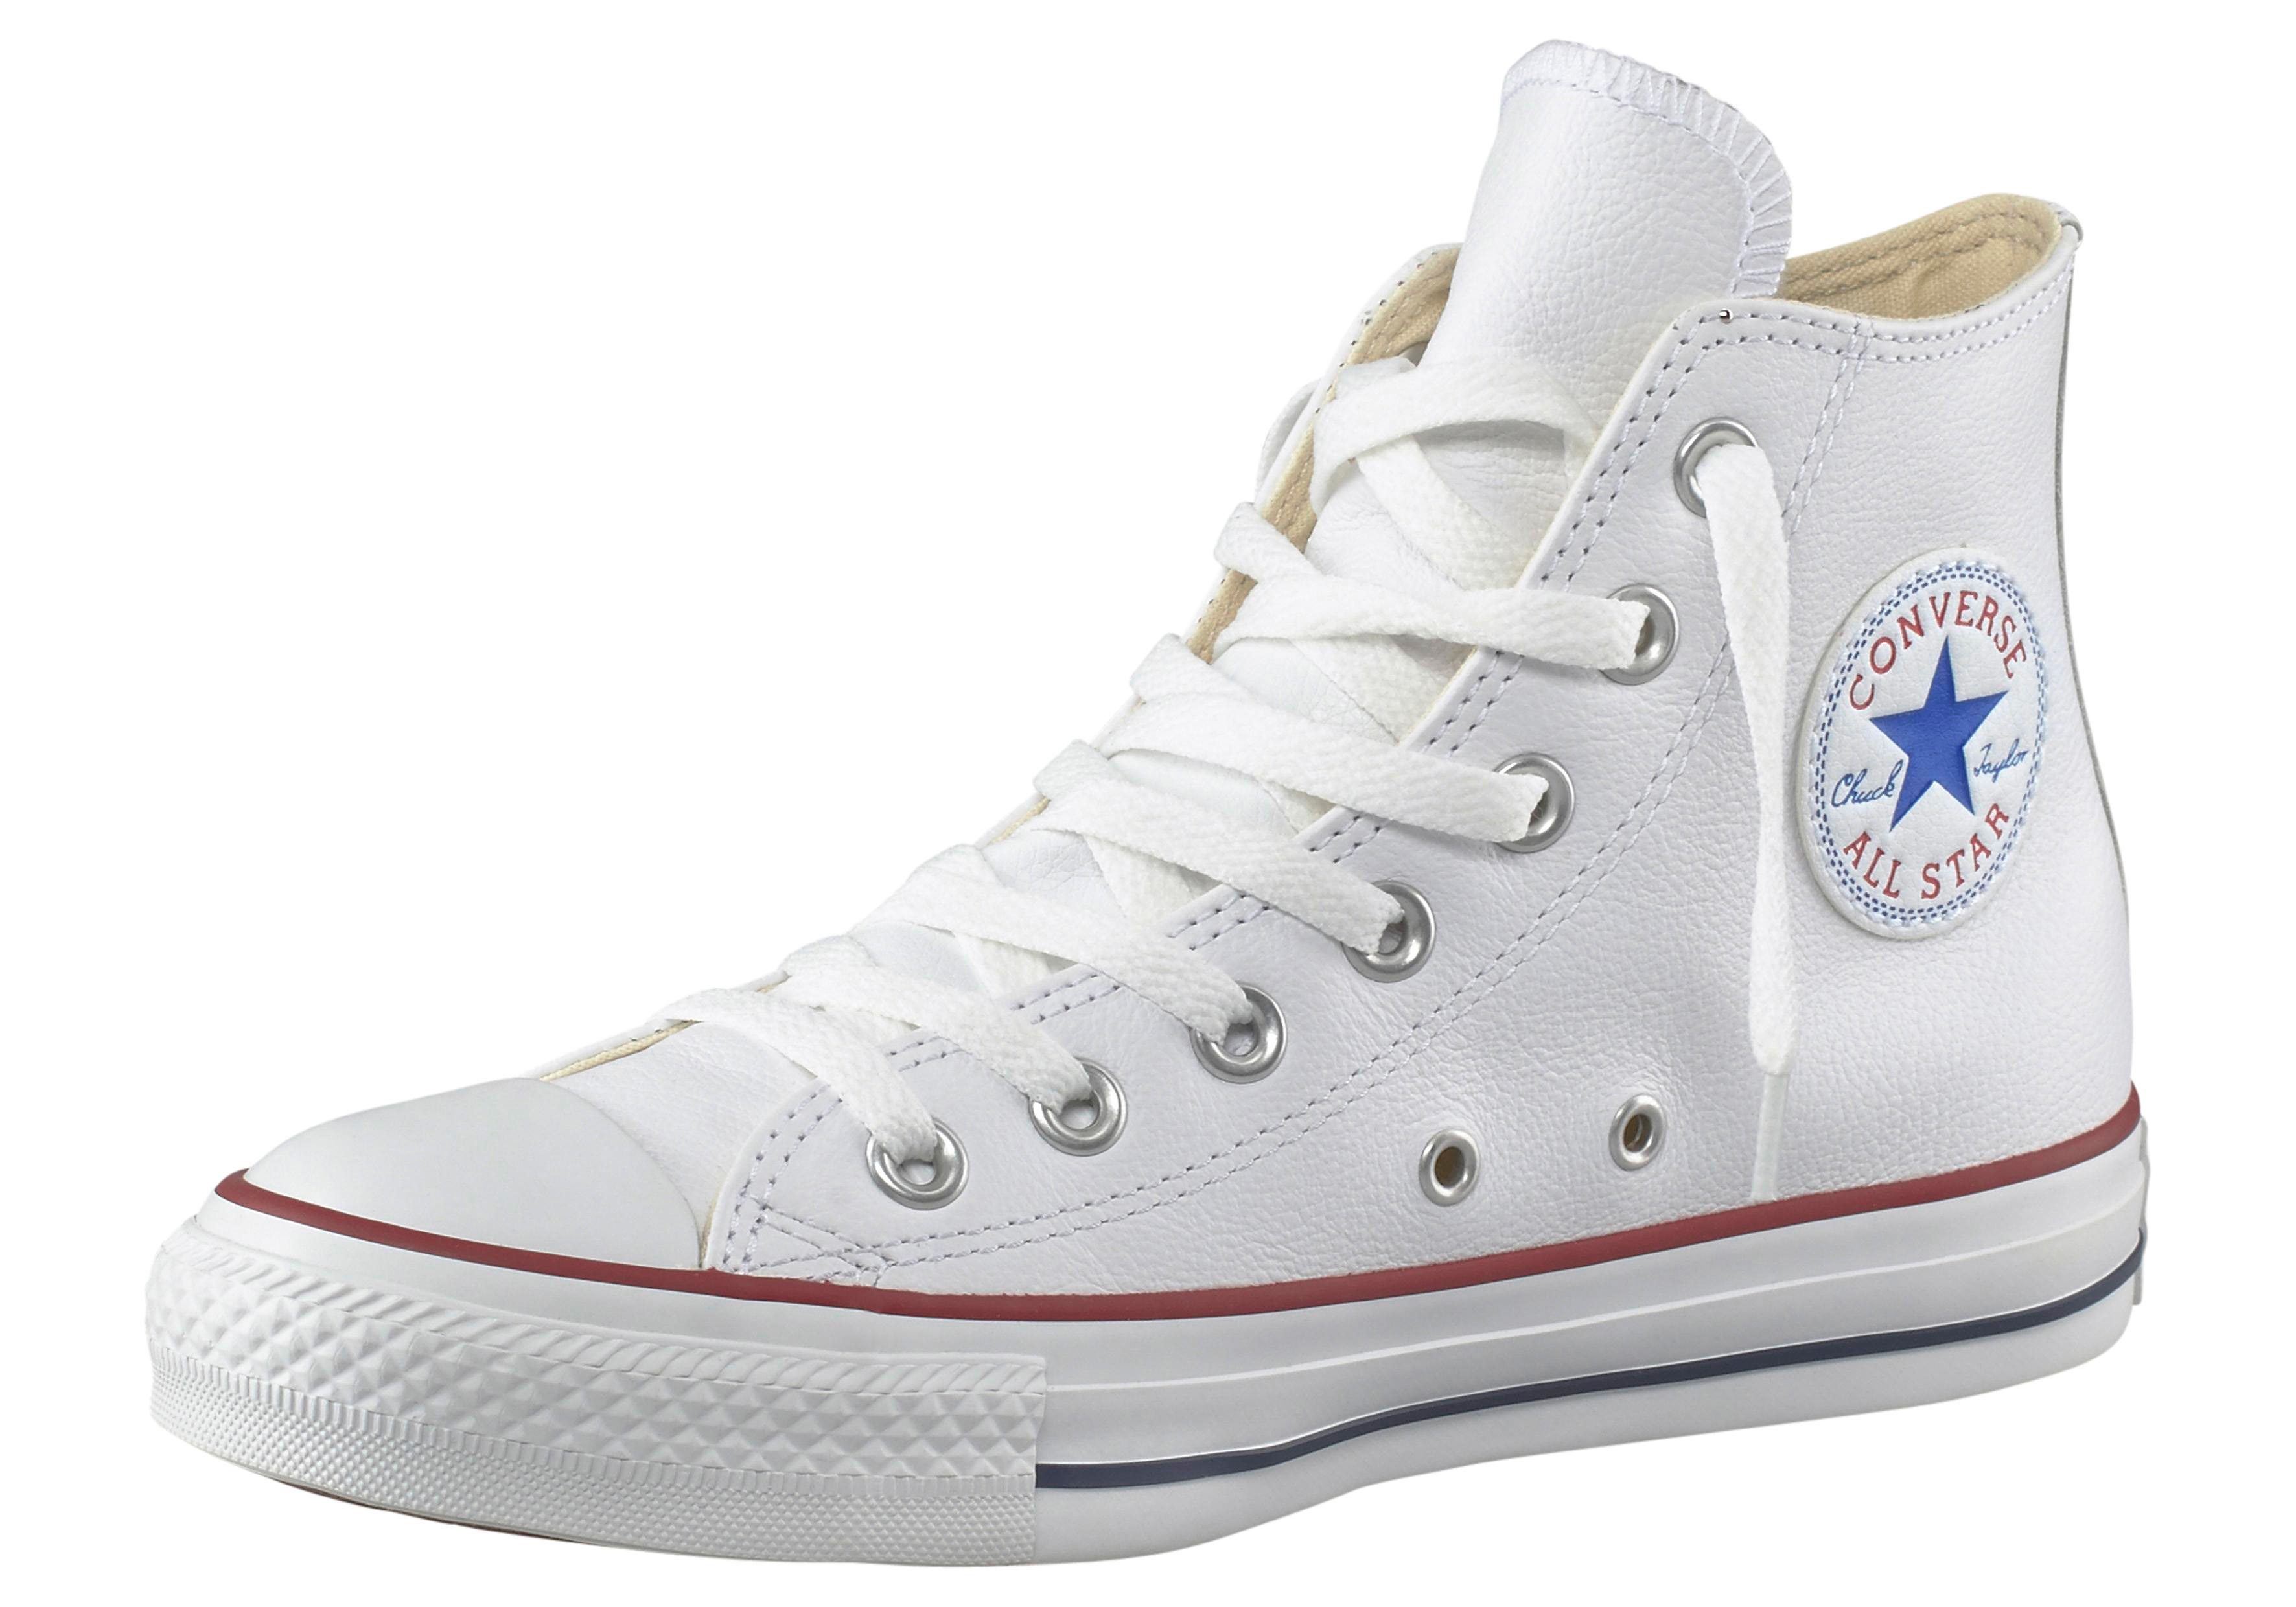 Converse »Chuck Taylor All Star Basic Leather Hi« Sneaker online kaufen |  OTTO